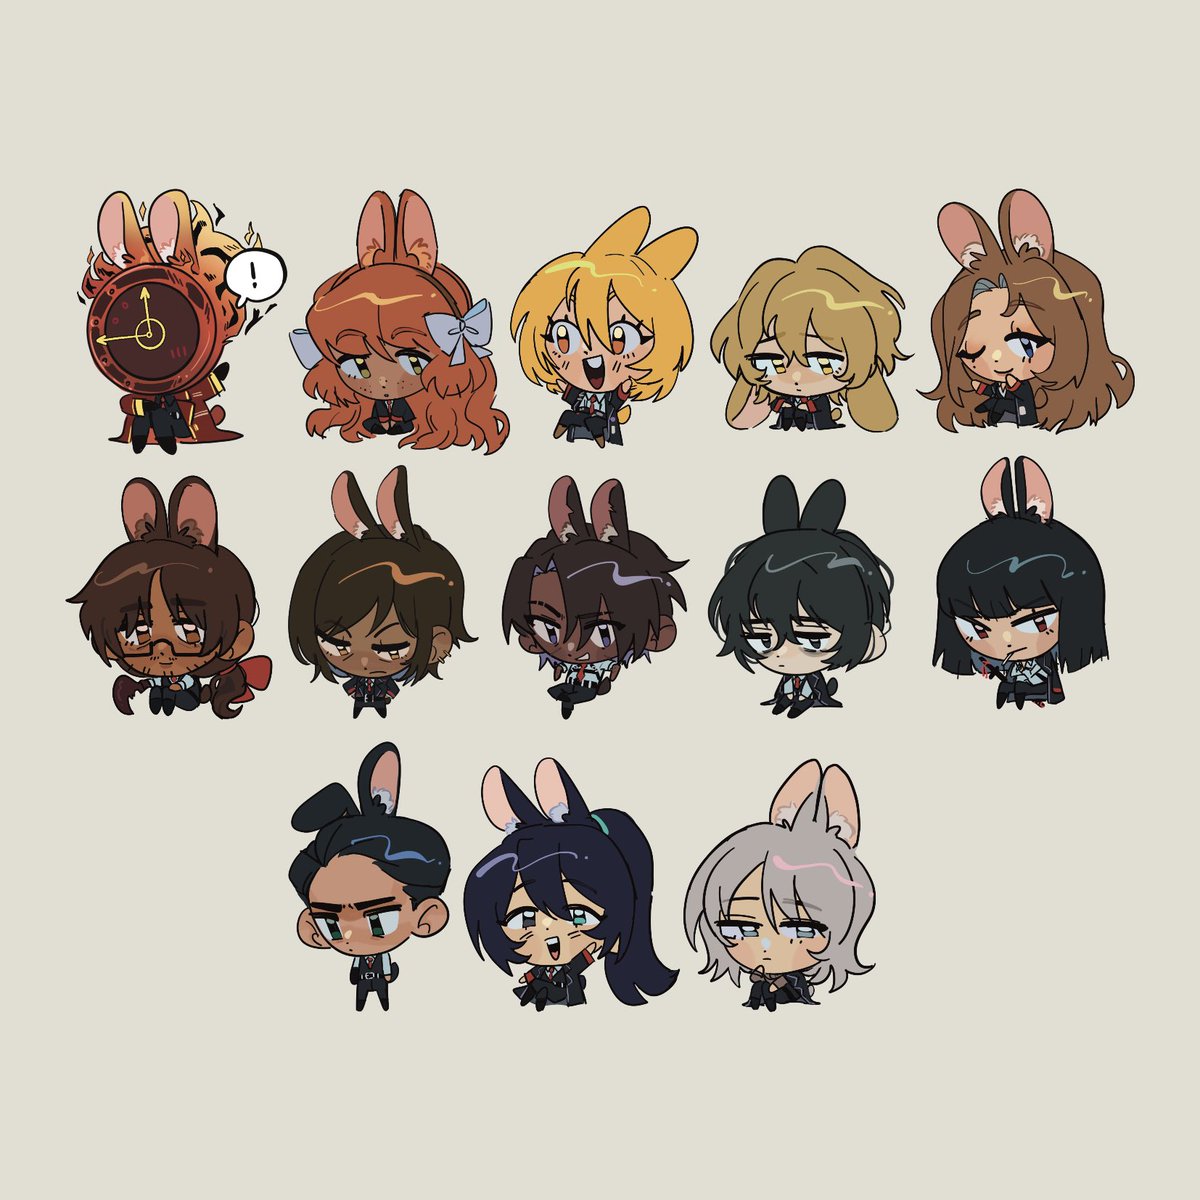 「and here's all of them arranged by hair 」|emm 🐇 cf16 E-08のイラスト